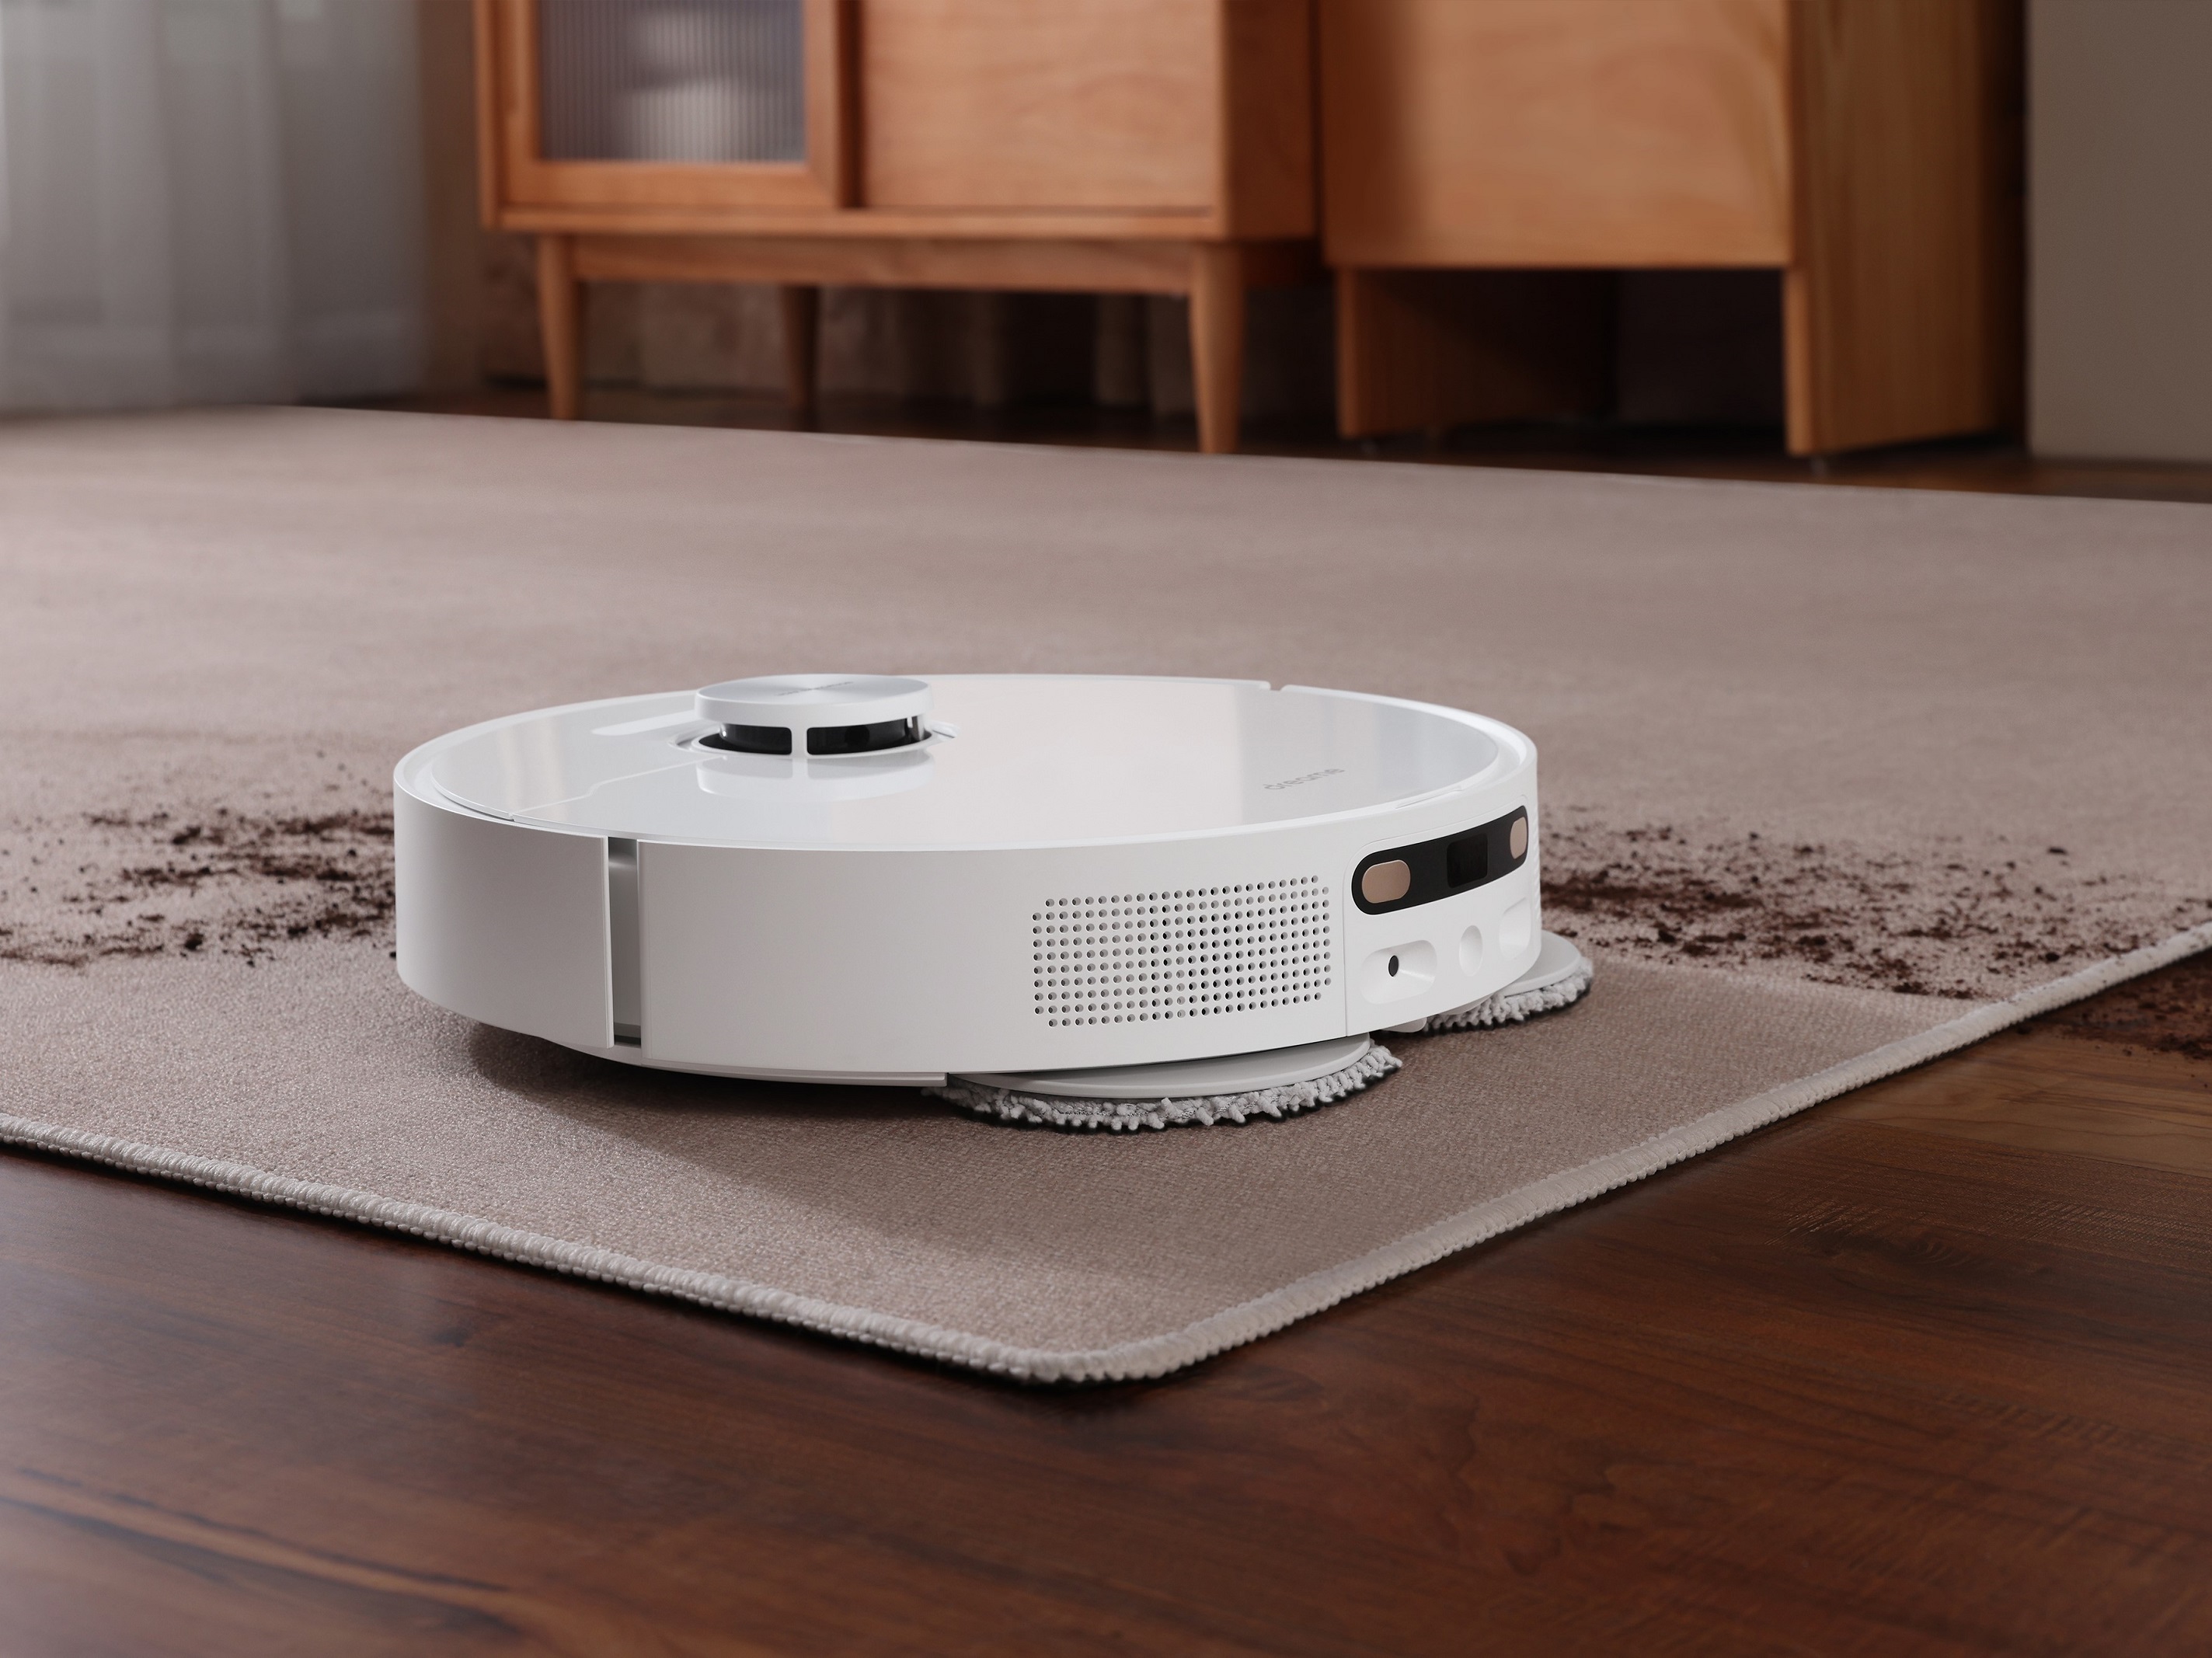 Dreame L10s Ultra review: The best vacuum robot in 2022?